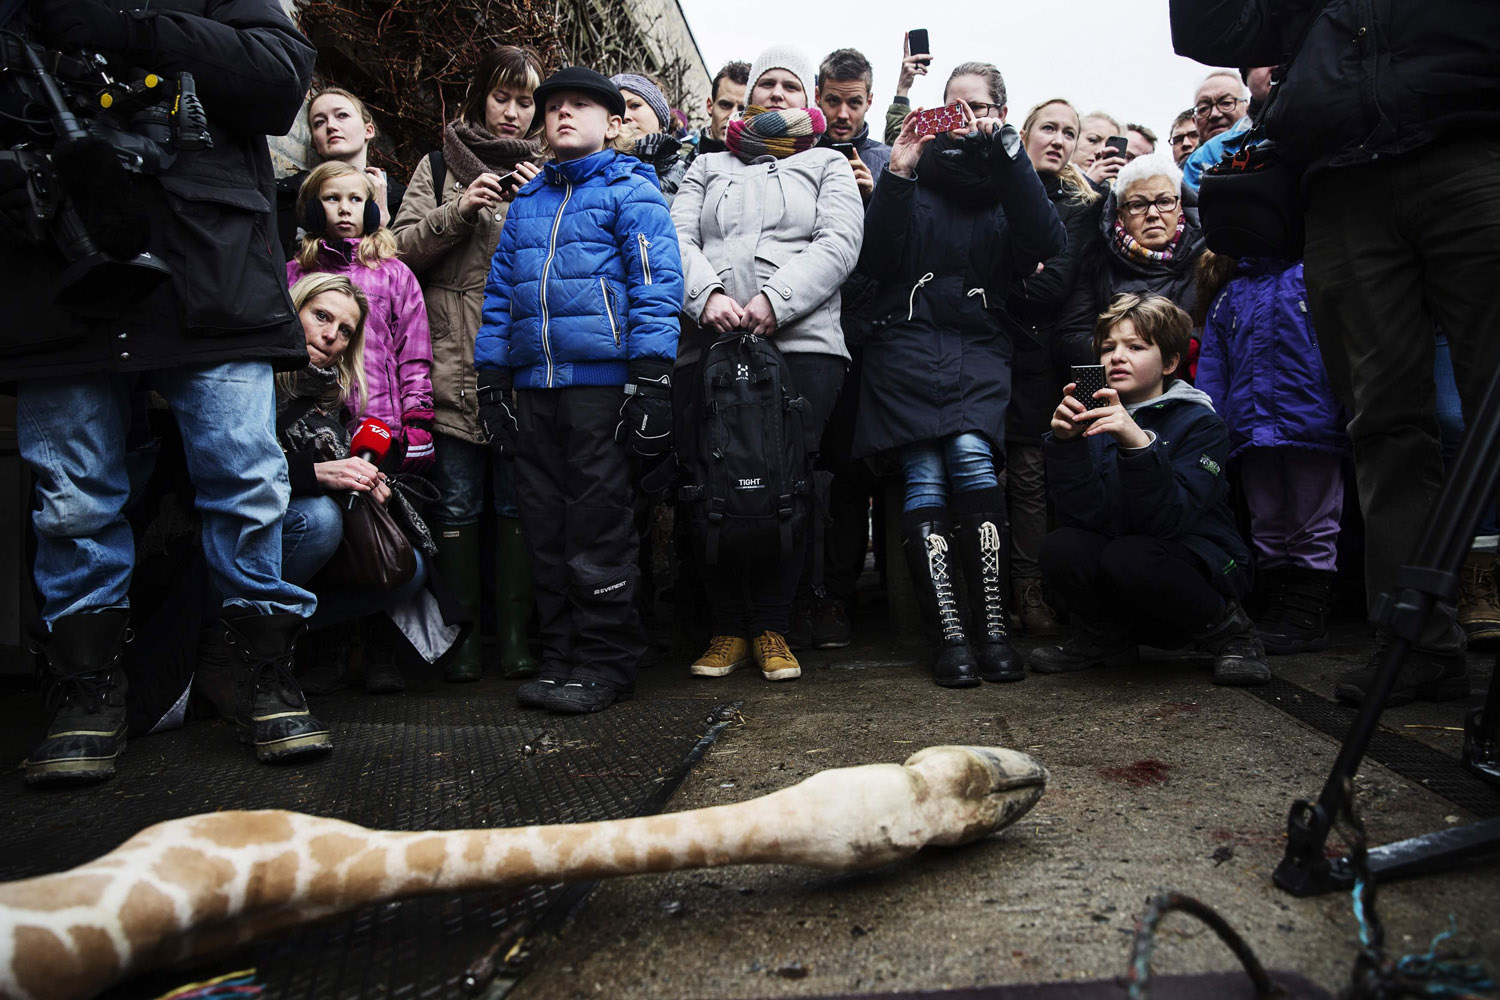 Feb. 9, 2014. People look at the carcass of the giraffe Marius after it was killed at the Copenhagen Zoo. The Copenhagen Zoo went ahead with a plan to shoot and dismember a healthy giraffe on Sunday and feed the 18-month-old animal's carcass to lions - an action the zoo said was in line with anti-inbreeding rules meant to ensure a healthy giraffe population.